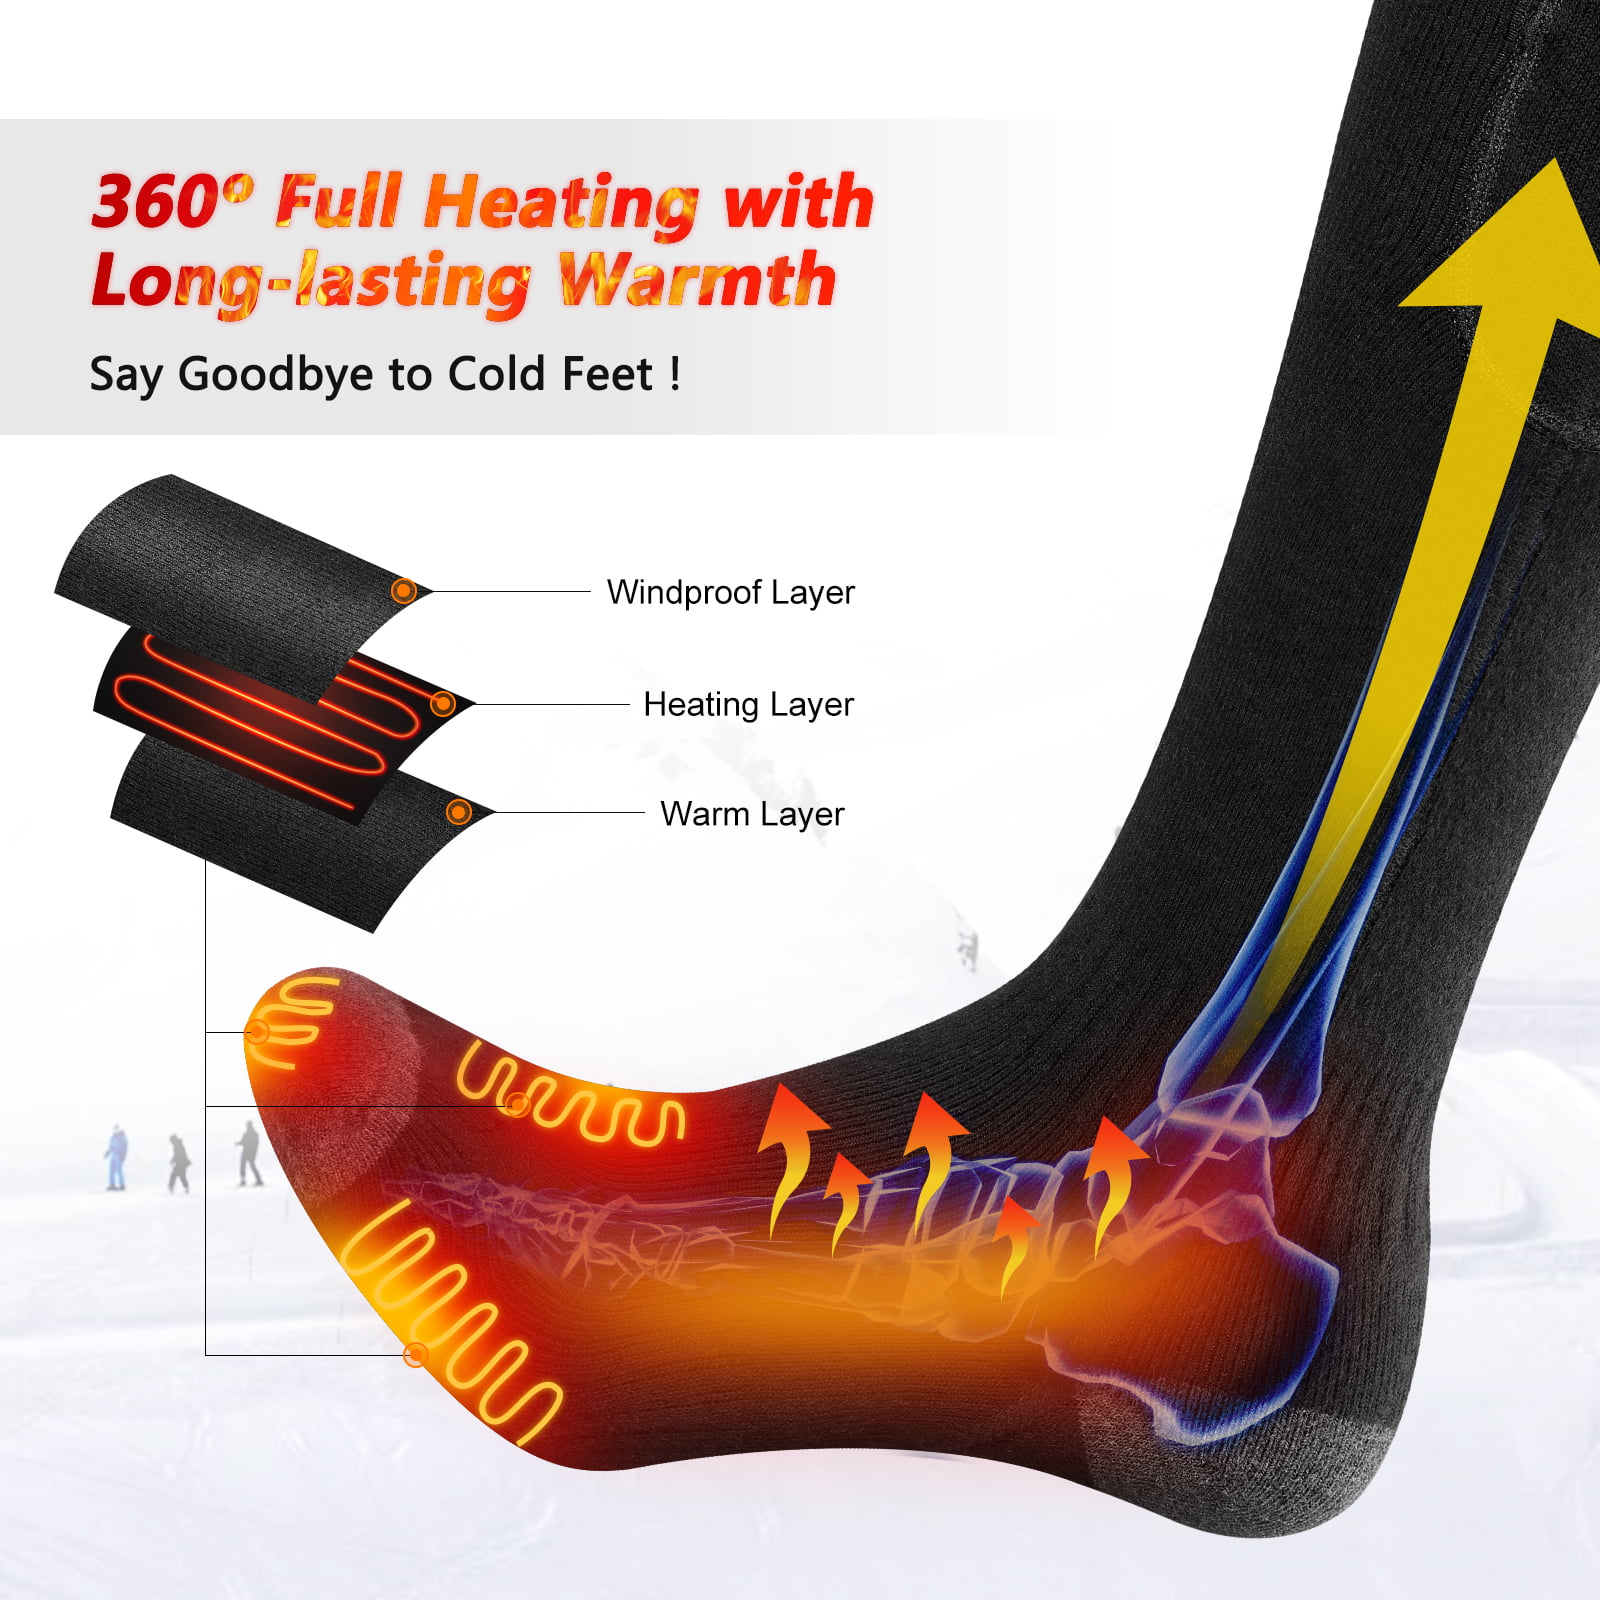 MOVTOTOP Heated Socks for Men/Women Rechargeable Washable 2020 Newest Electric Socks 3 Heat Settings Battery Heated Socks Upgrade Heating Element up to 140℉ for Outdoor&Indoor Activities Heated Socks 